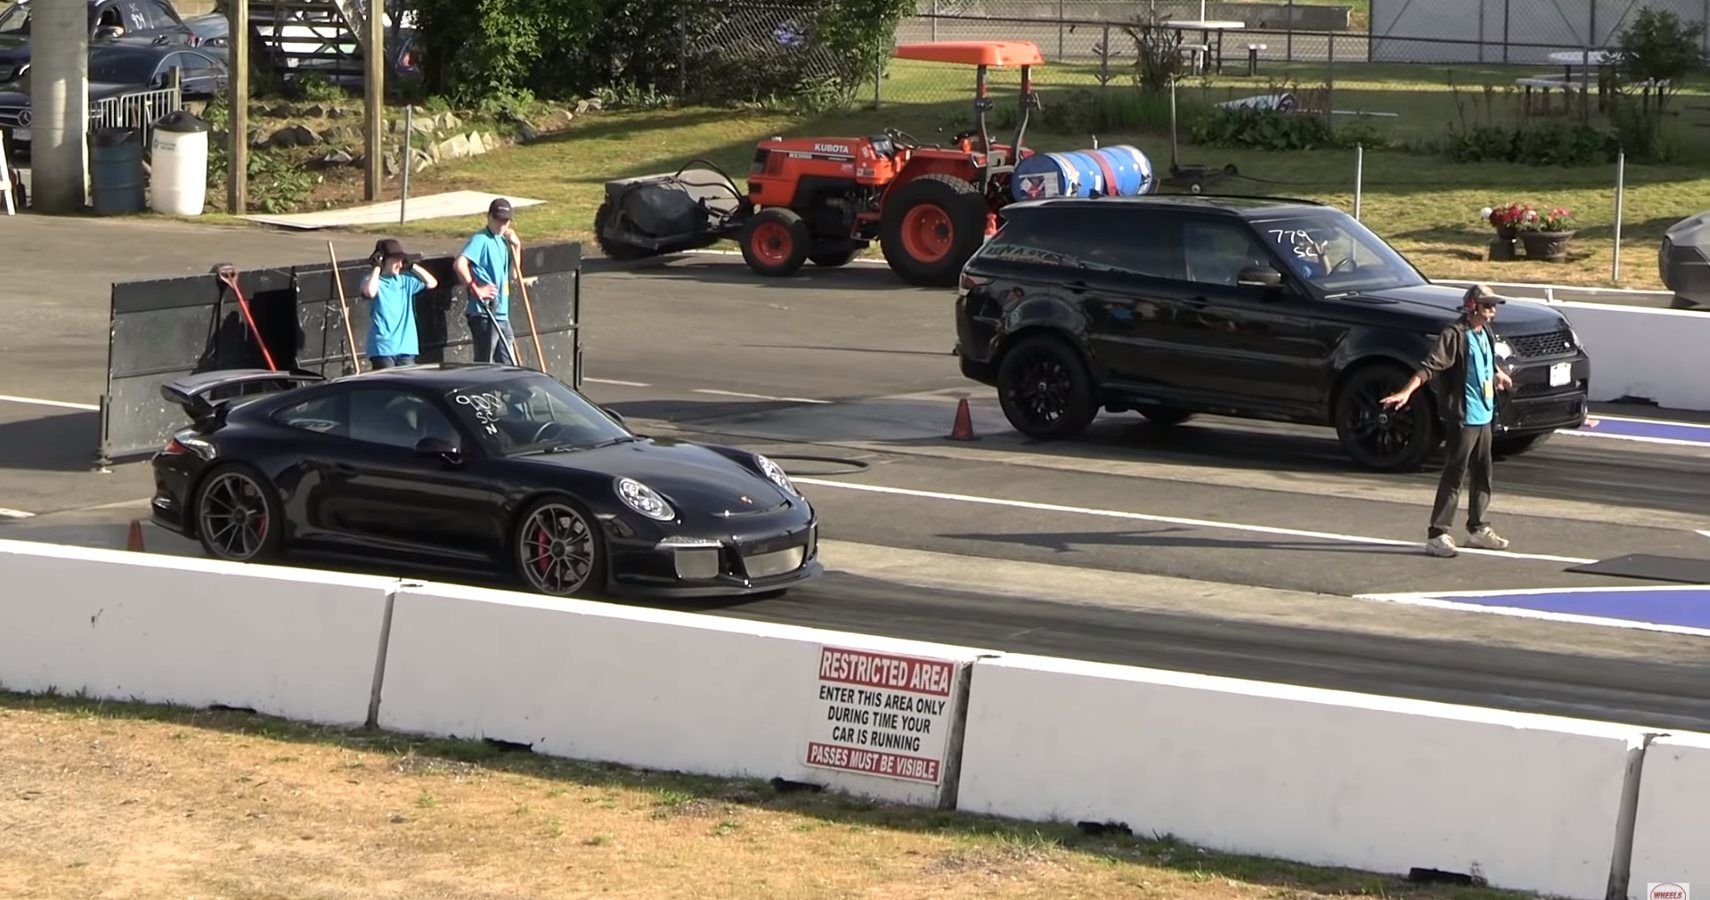 A Porsche 911 GT3 Takes On A Range Rover Sport SVR and Mercedes CLS500 In Quarter-Mile Action